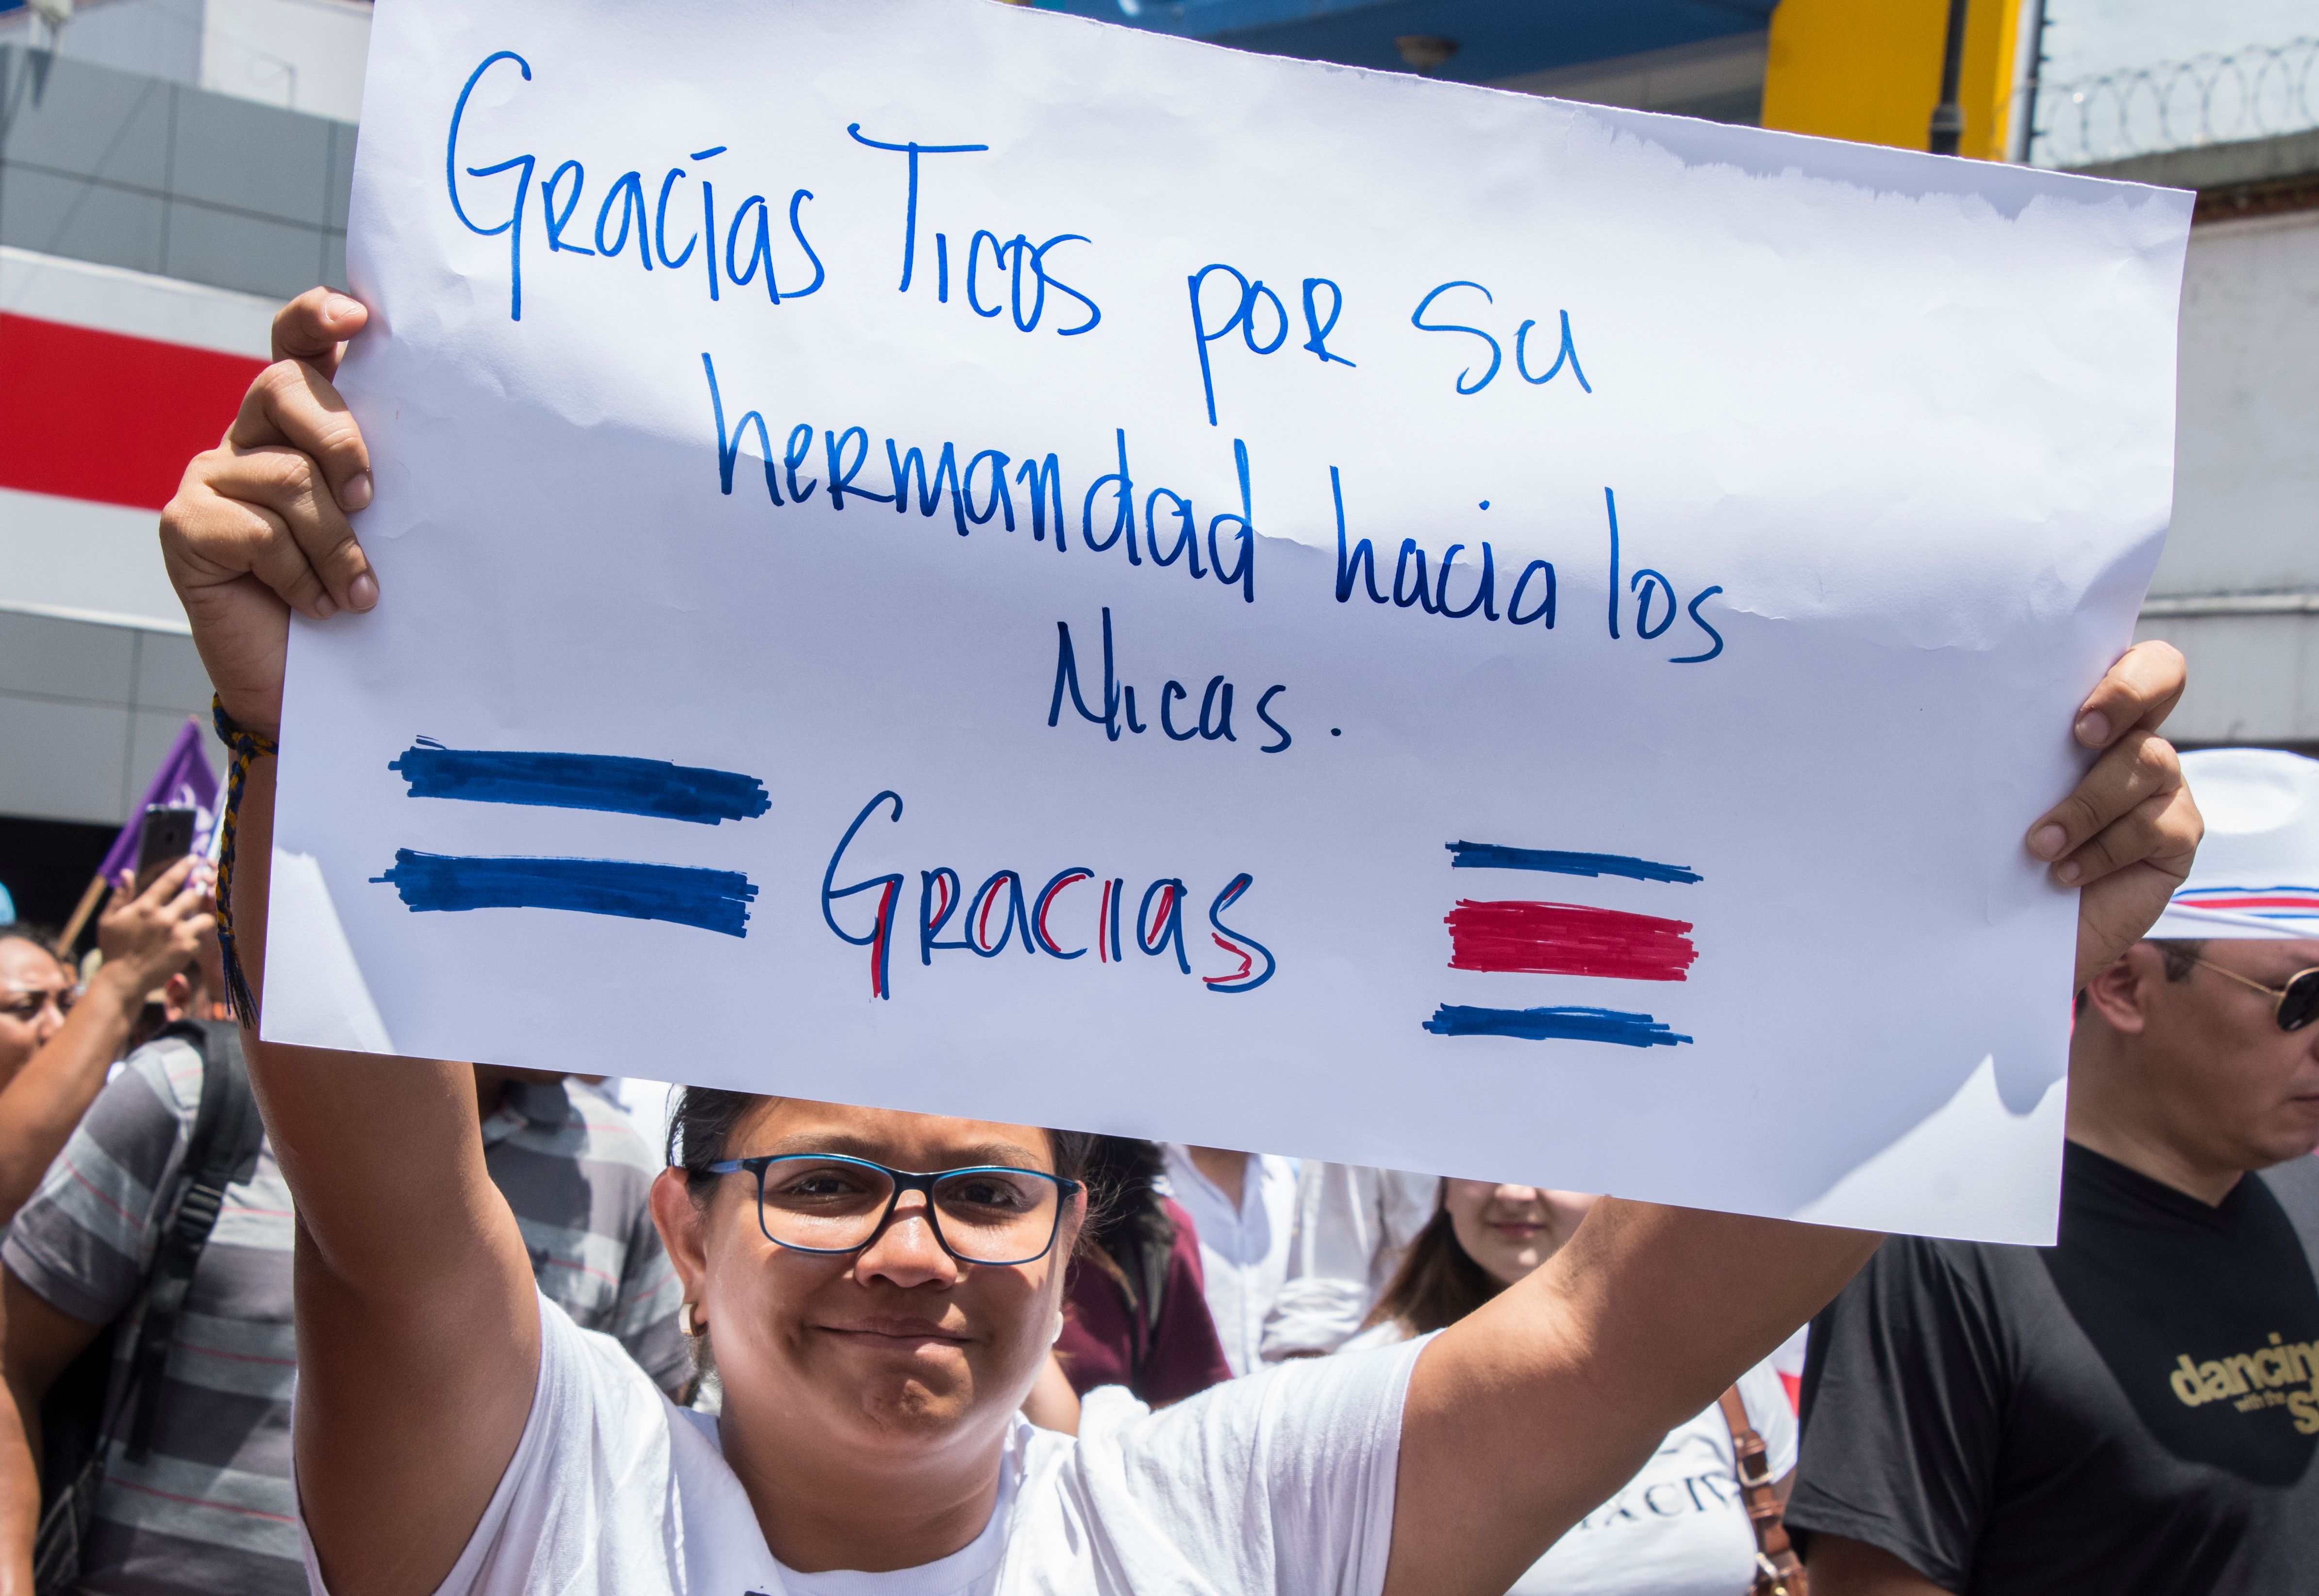 A woman holds up a sign reading "Thanks Ticos [Costa Ricans] for your brotherhood towards the Nicaraguans, thanks. 